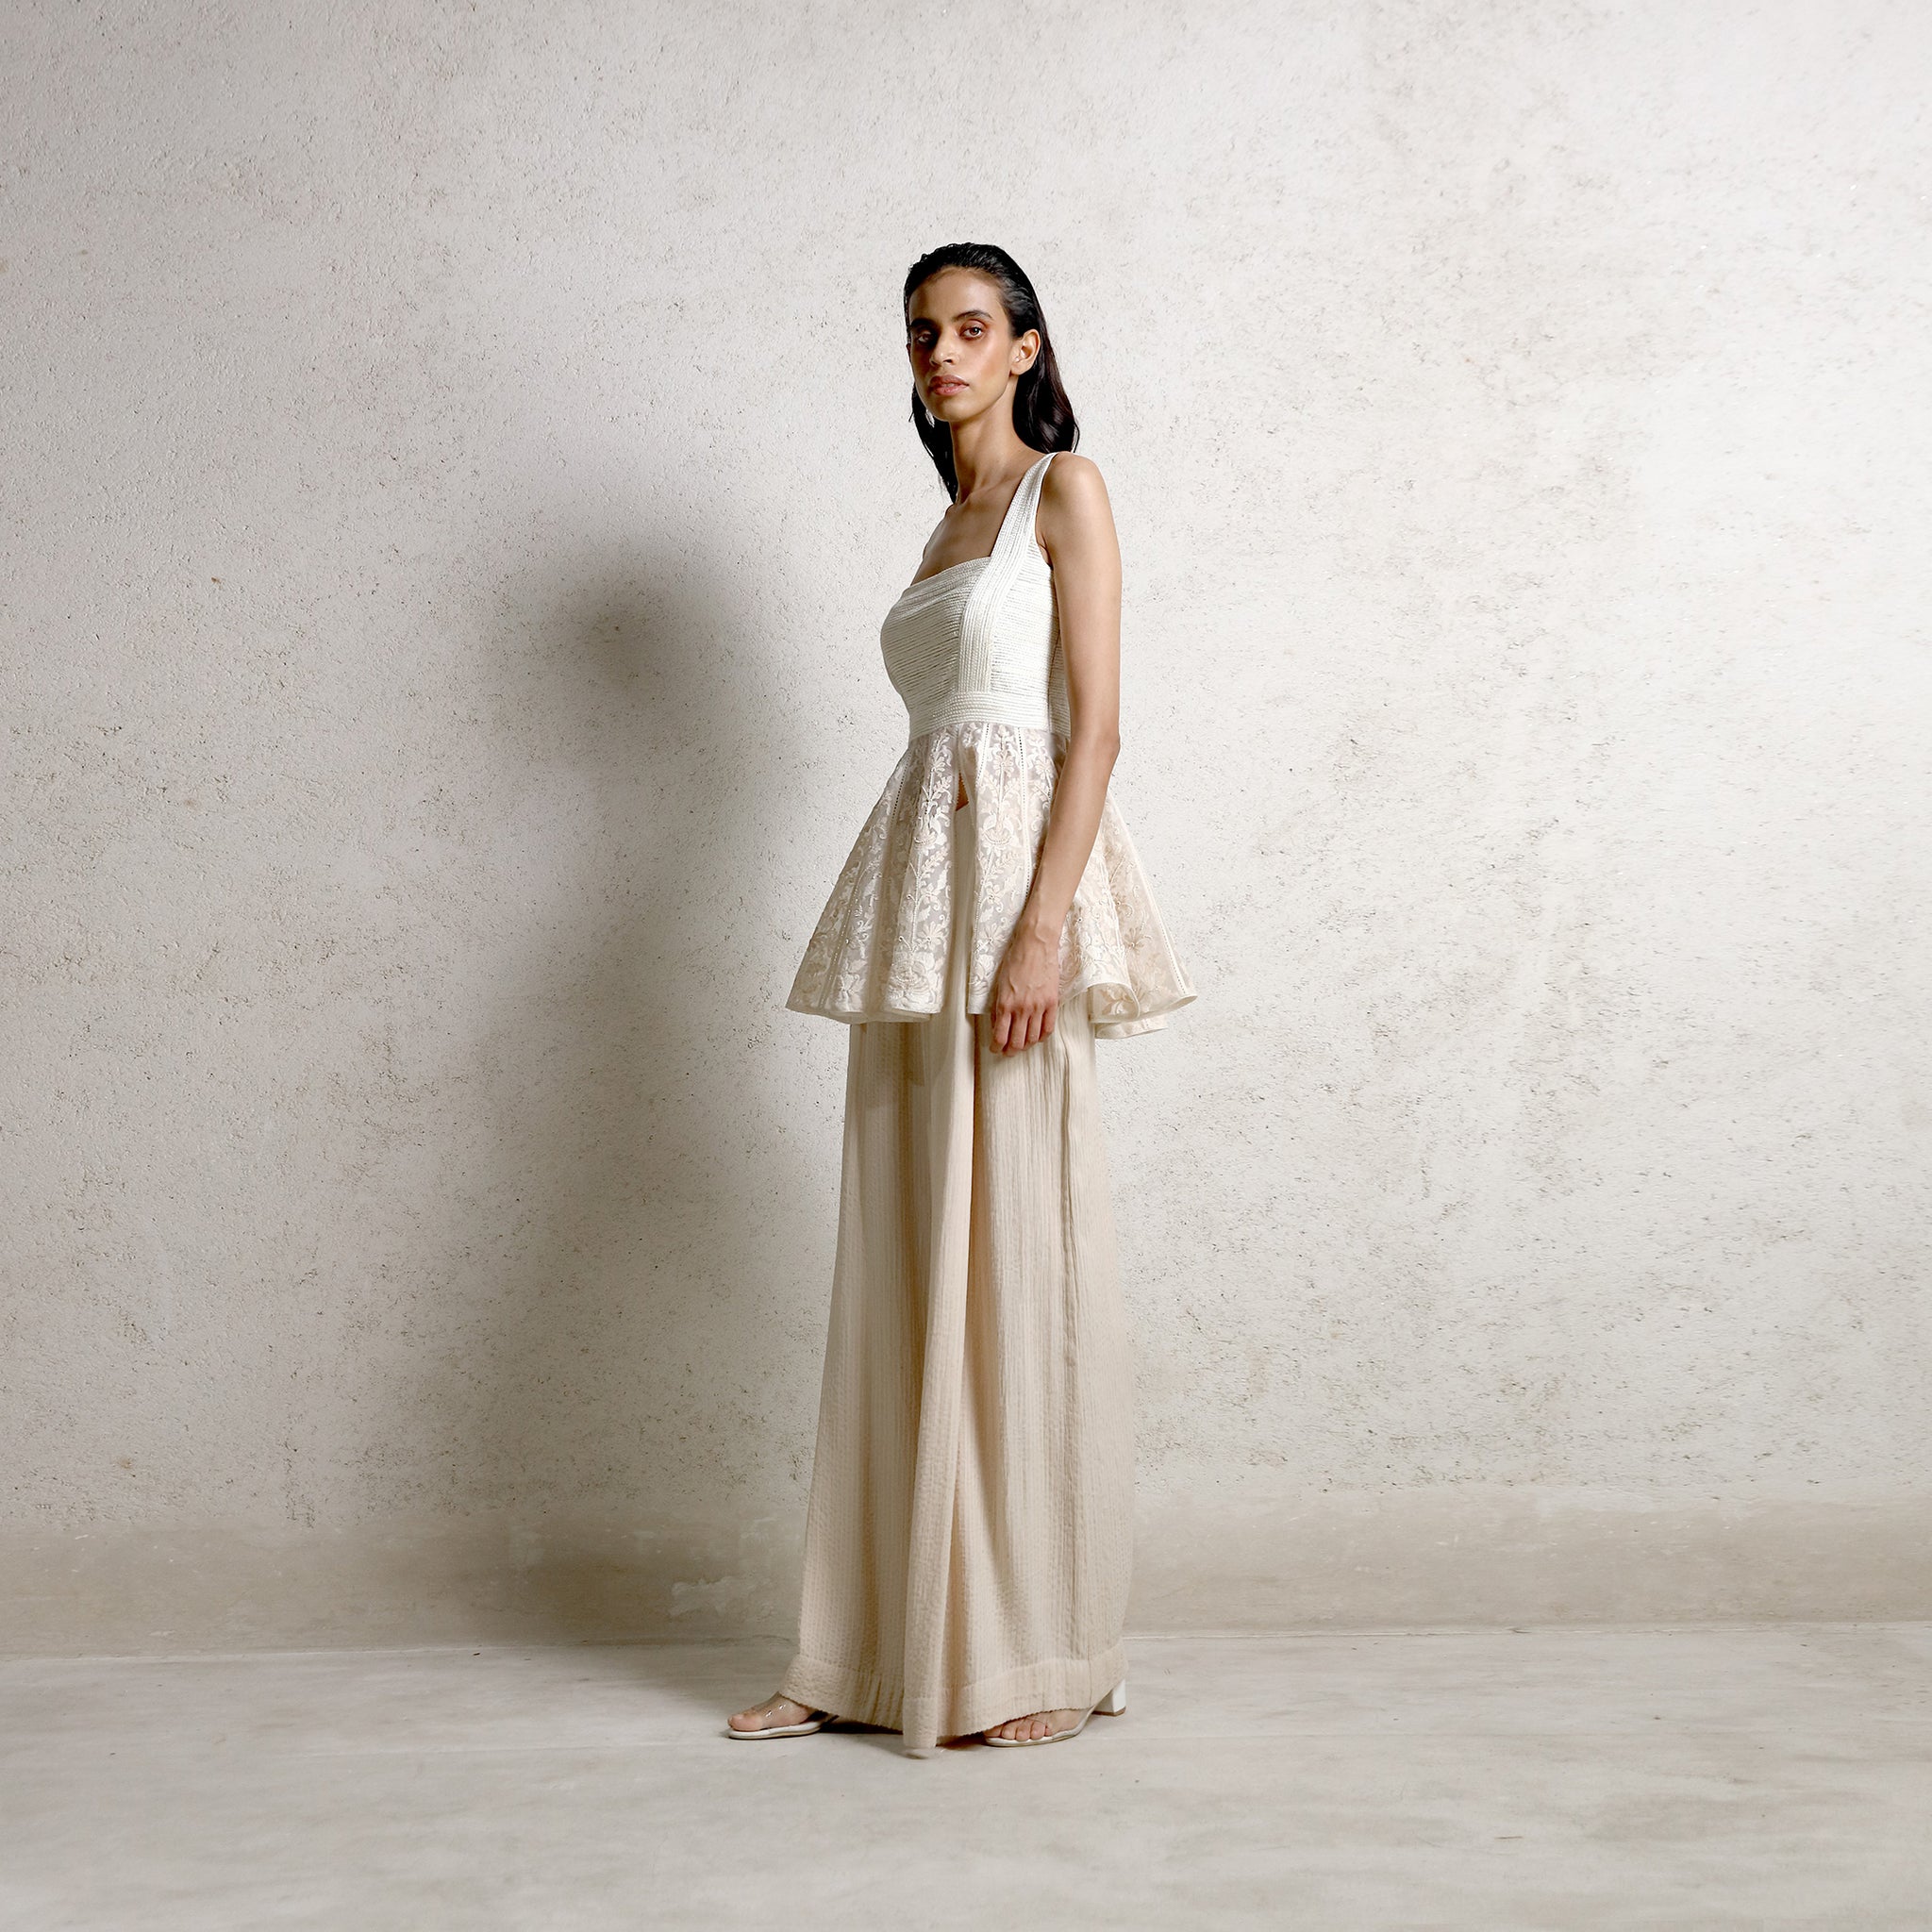 Fine shadow works tonal embroidered peplum top with fine pearl highlighting teamed up textured chiffon high waisted. The look has a very elegant classic feel. the play of textured lines adds in the modern edgy touch. the look is a perfect pic for a high tea or a lunch where you want to speak style and elegance without saying much. #Abhishekstudio #abhisheksharma  #fashiondesignerabhisheksharma #designerware #ambawattaone